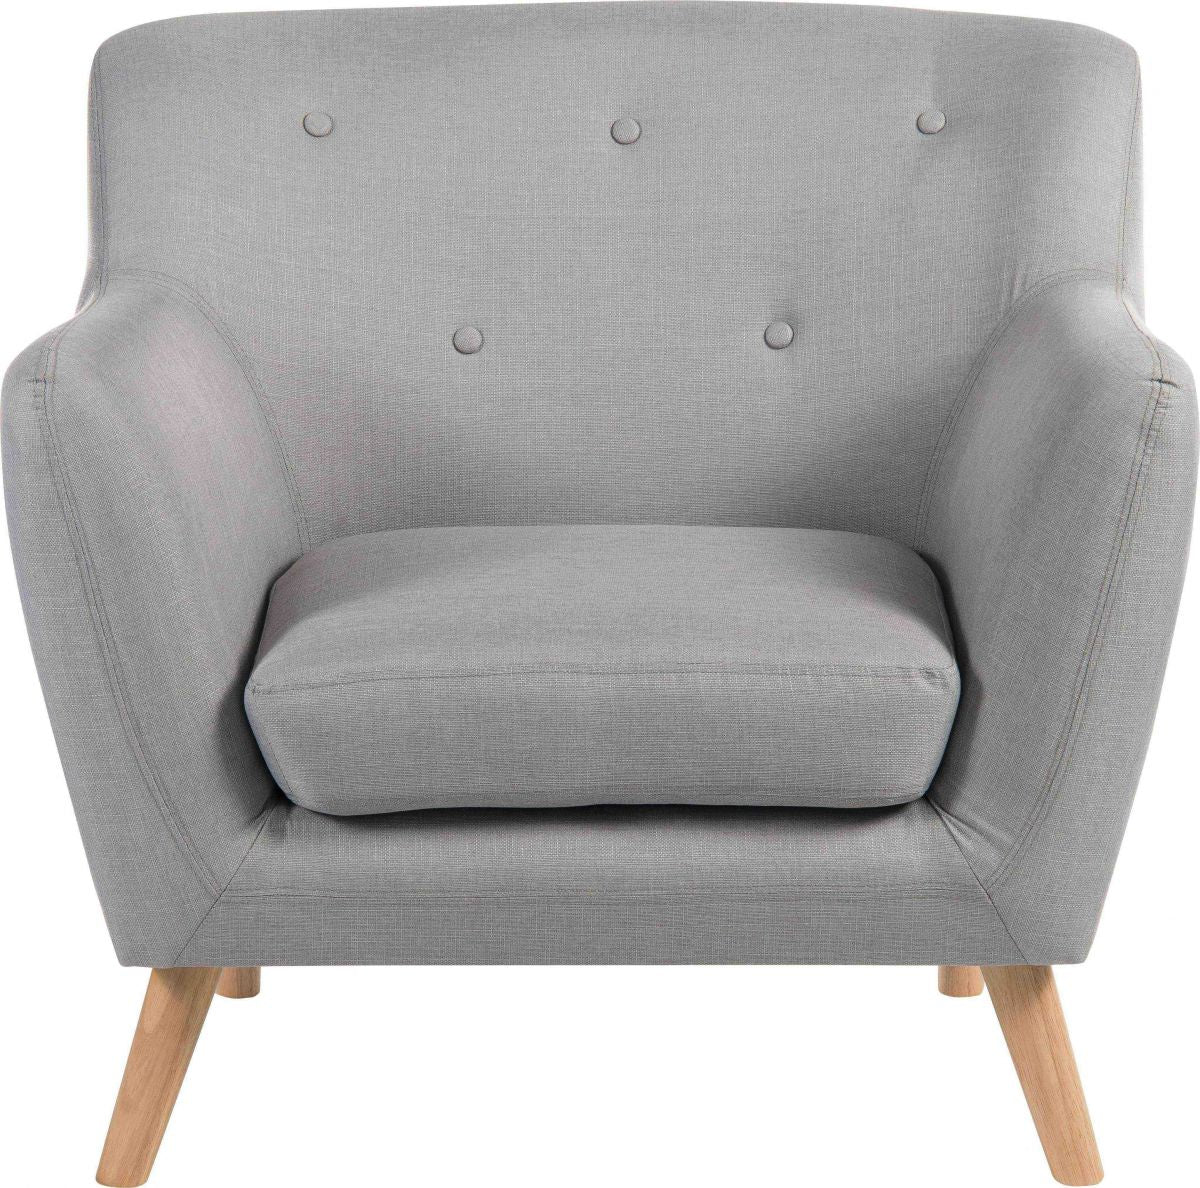 Classy Grey Fabric Sofa with Wooden Legs - One, Two or Three Seat Available - SKANDI